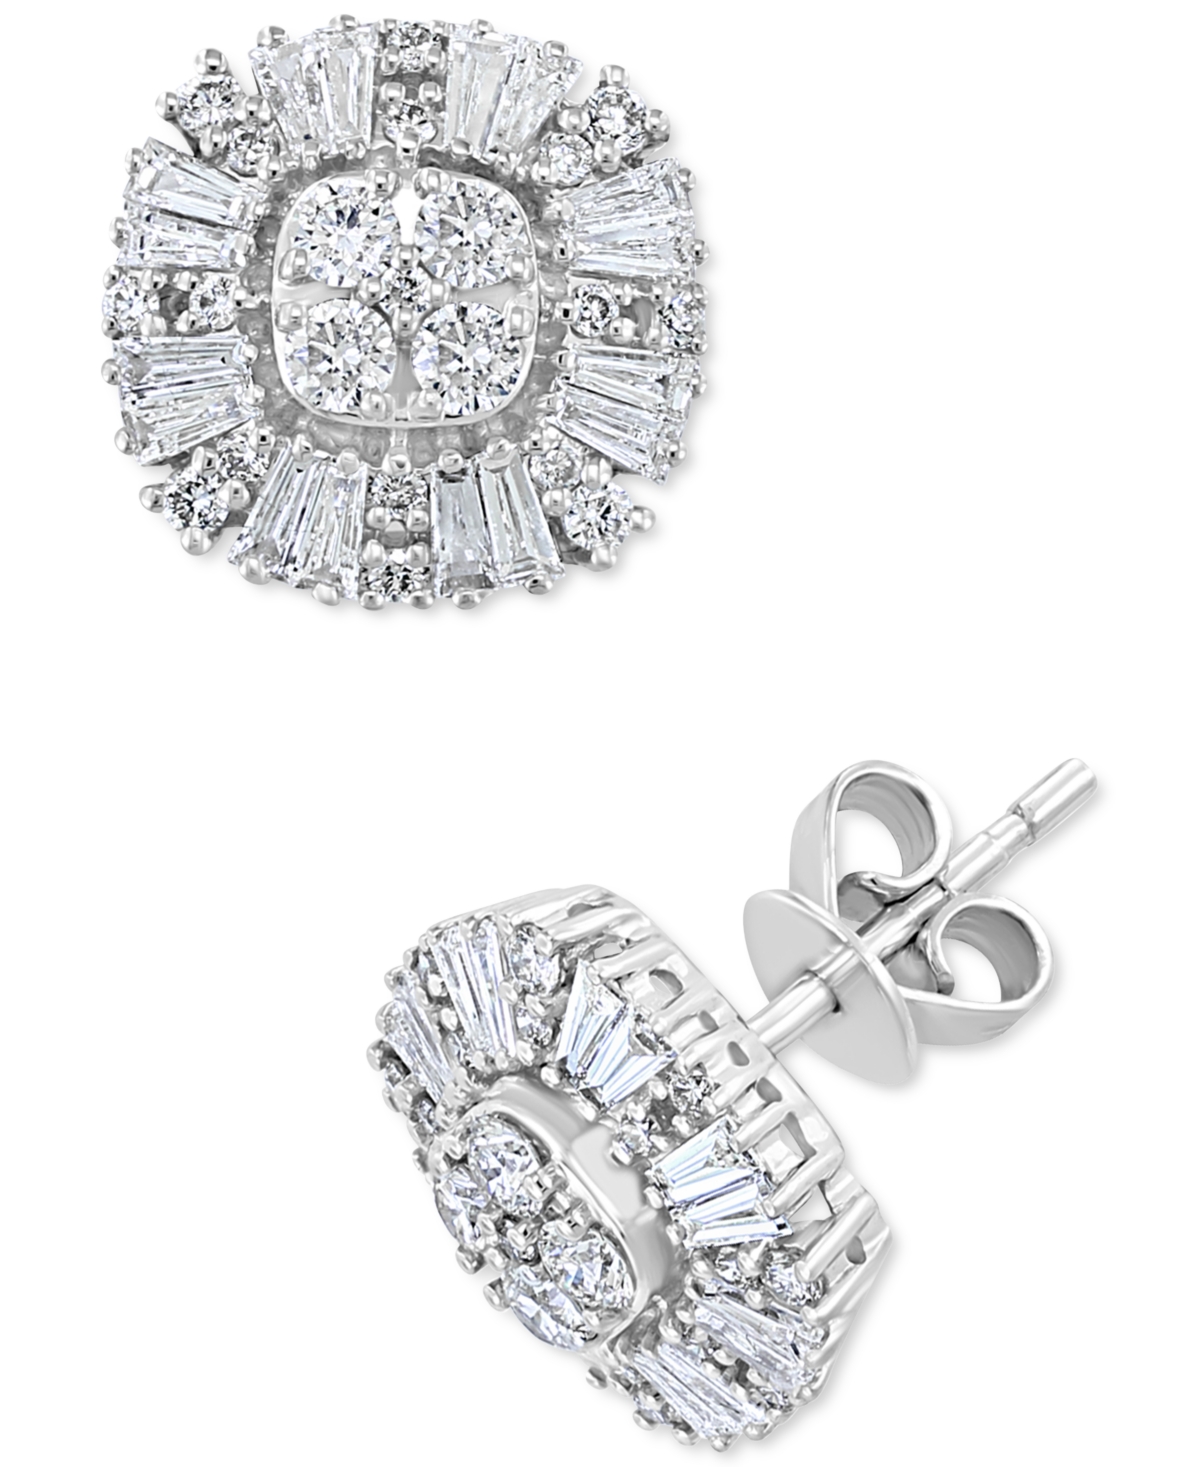 Effy Collection Effy Diamond Baguette Halo Cluster Stud Earrings (1-1/8 ct. t.w.) in 14k White Gold